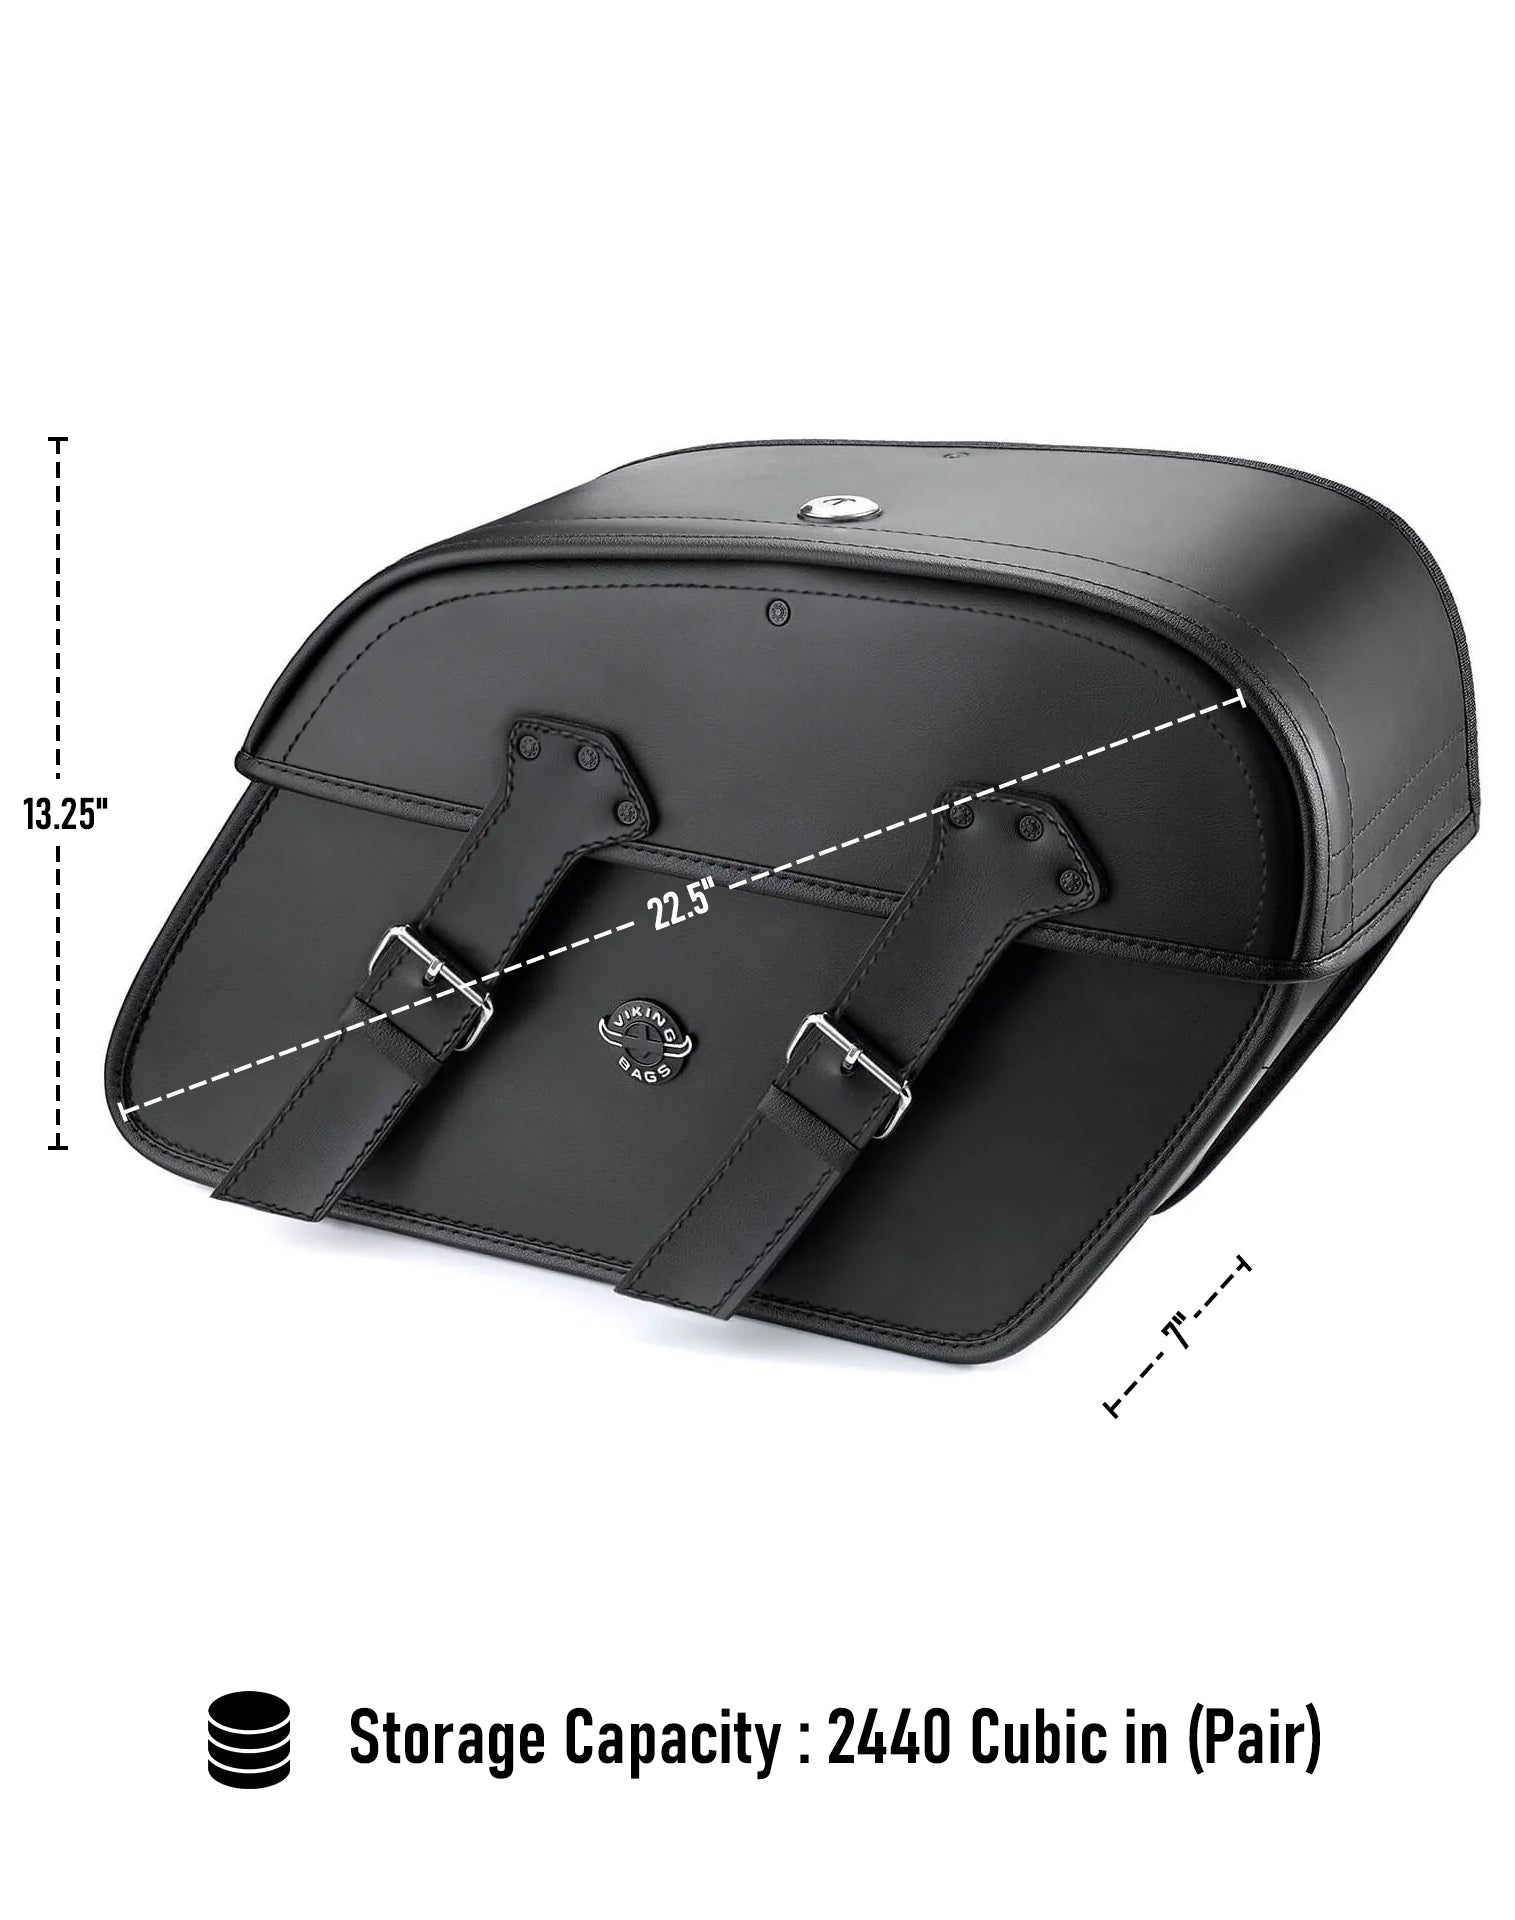 Viking Raven Extra Large Honda Vtx 1800 C Leather Motorcycle Saddlebags Can Store Your Ridings Gears